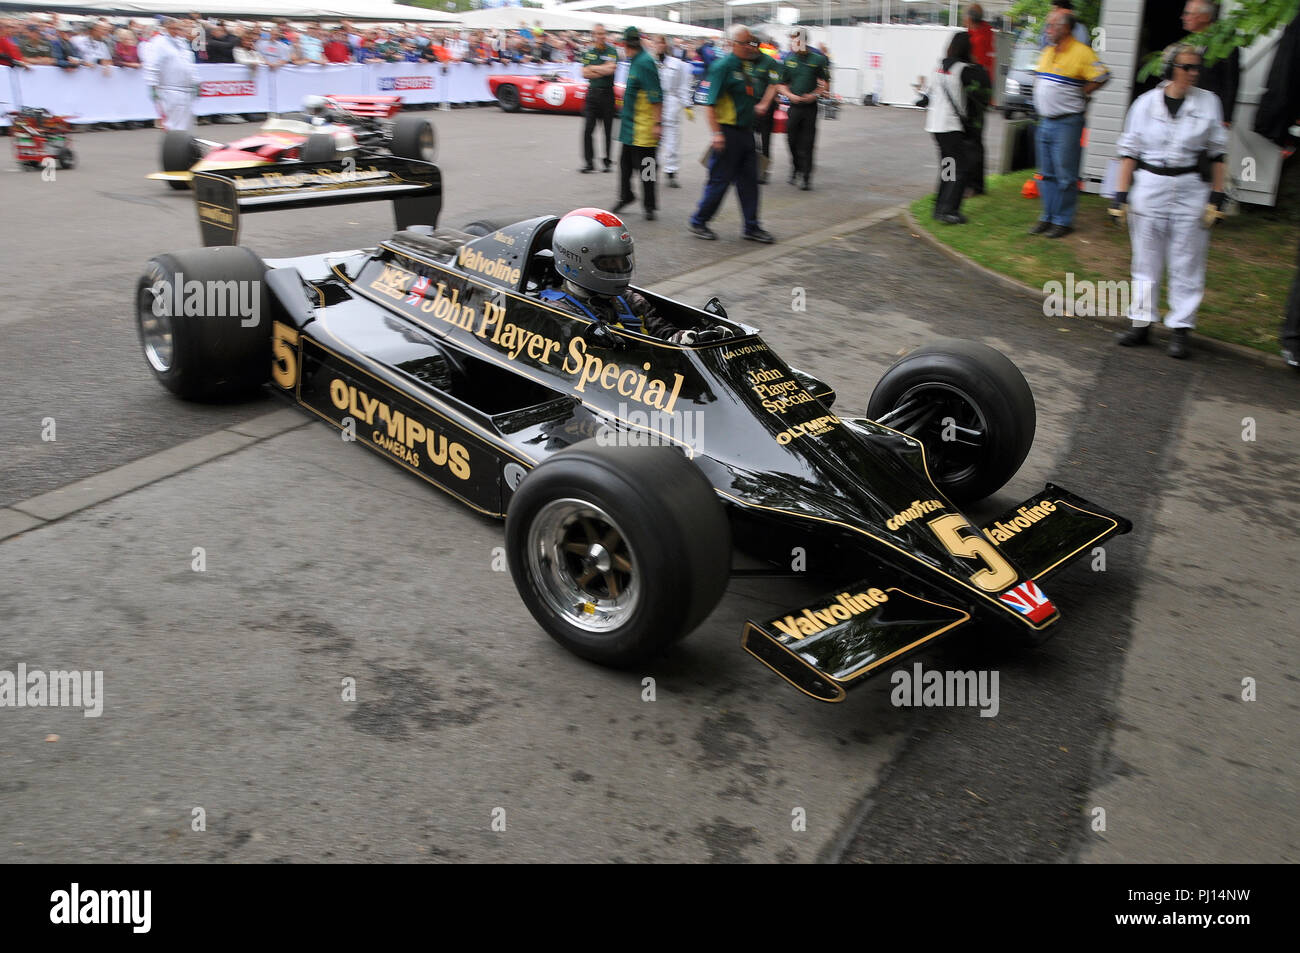 John player special f1 car hi-res stock photography and images - Alamy